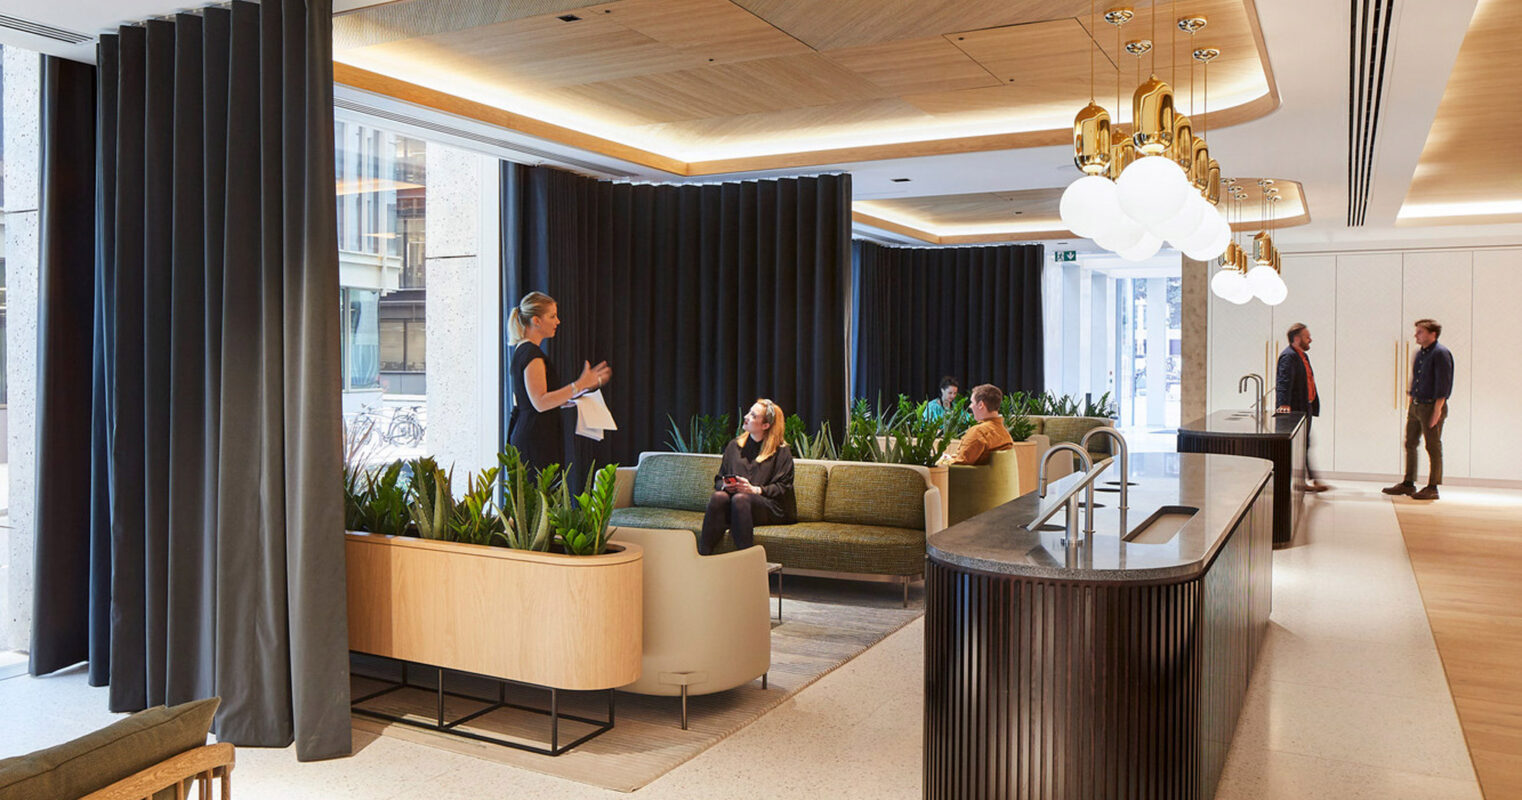 Modern office lobby with a warm, welcoming atmosphere, featuring curved wooden reception desk, elegant suspended light fixtures, and vertical drapery creating private nooks. Rich plant arrangements add a natural touch, while people converse and work, emphasizing the space's functional design.